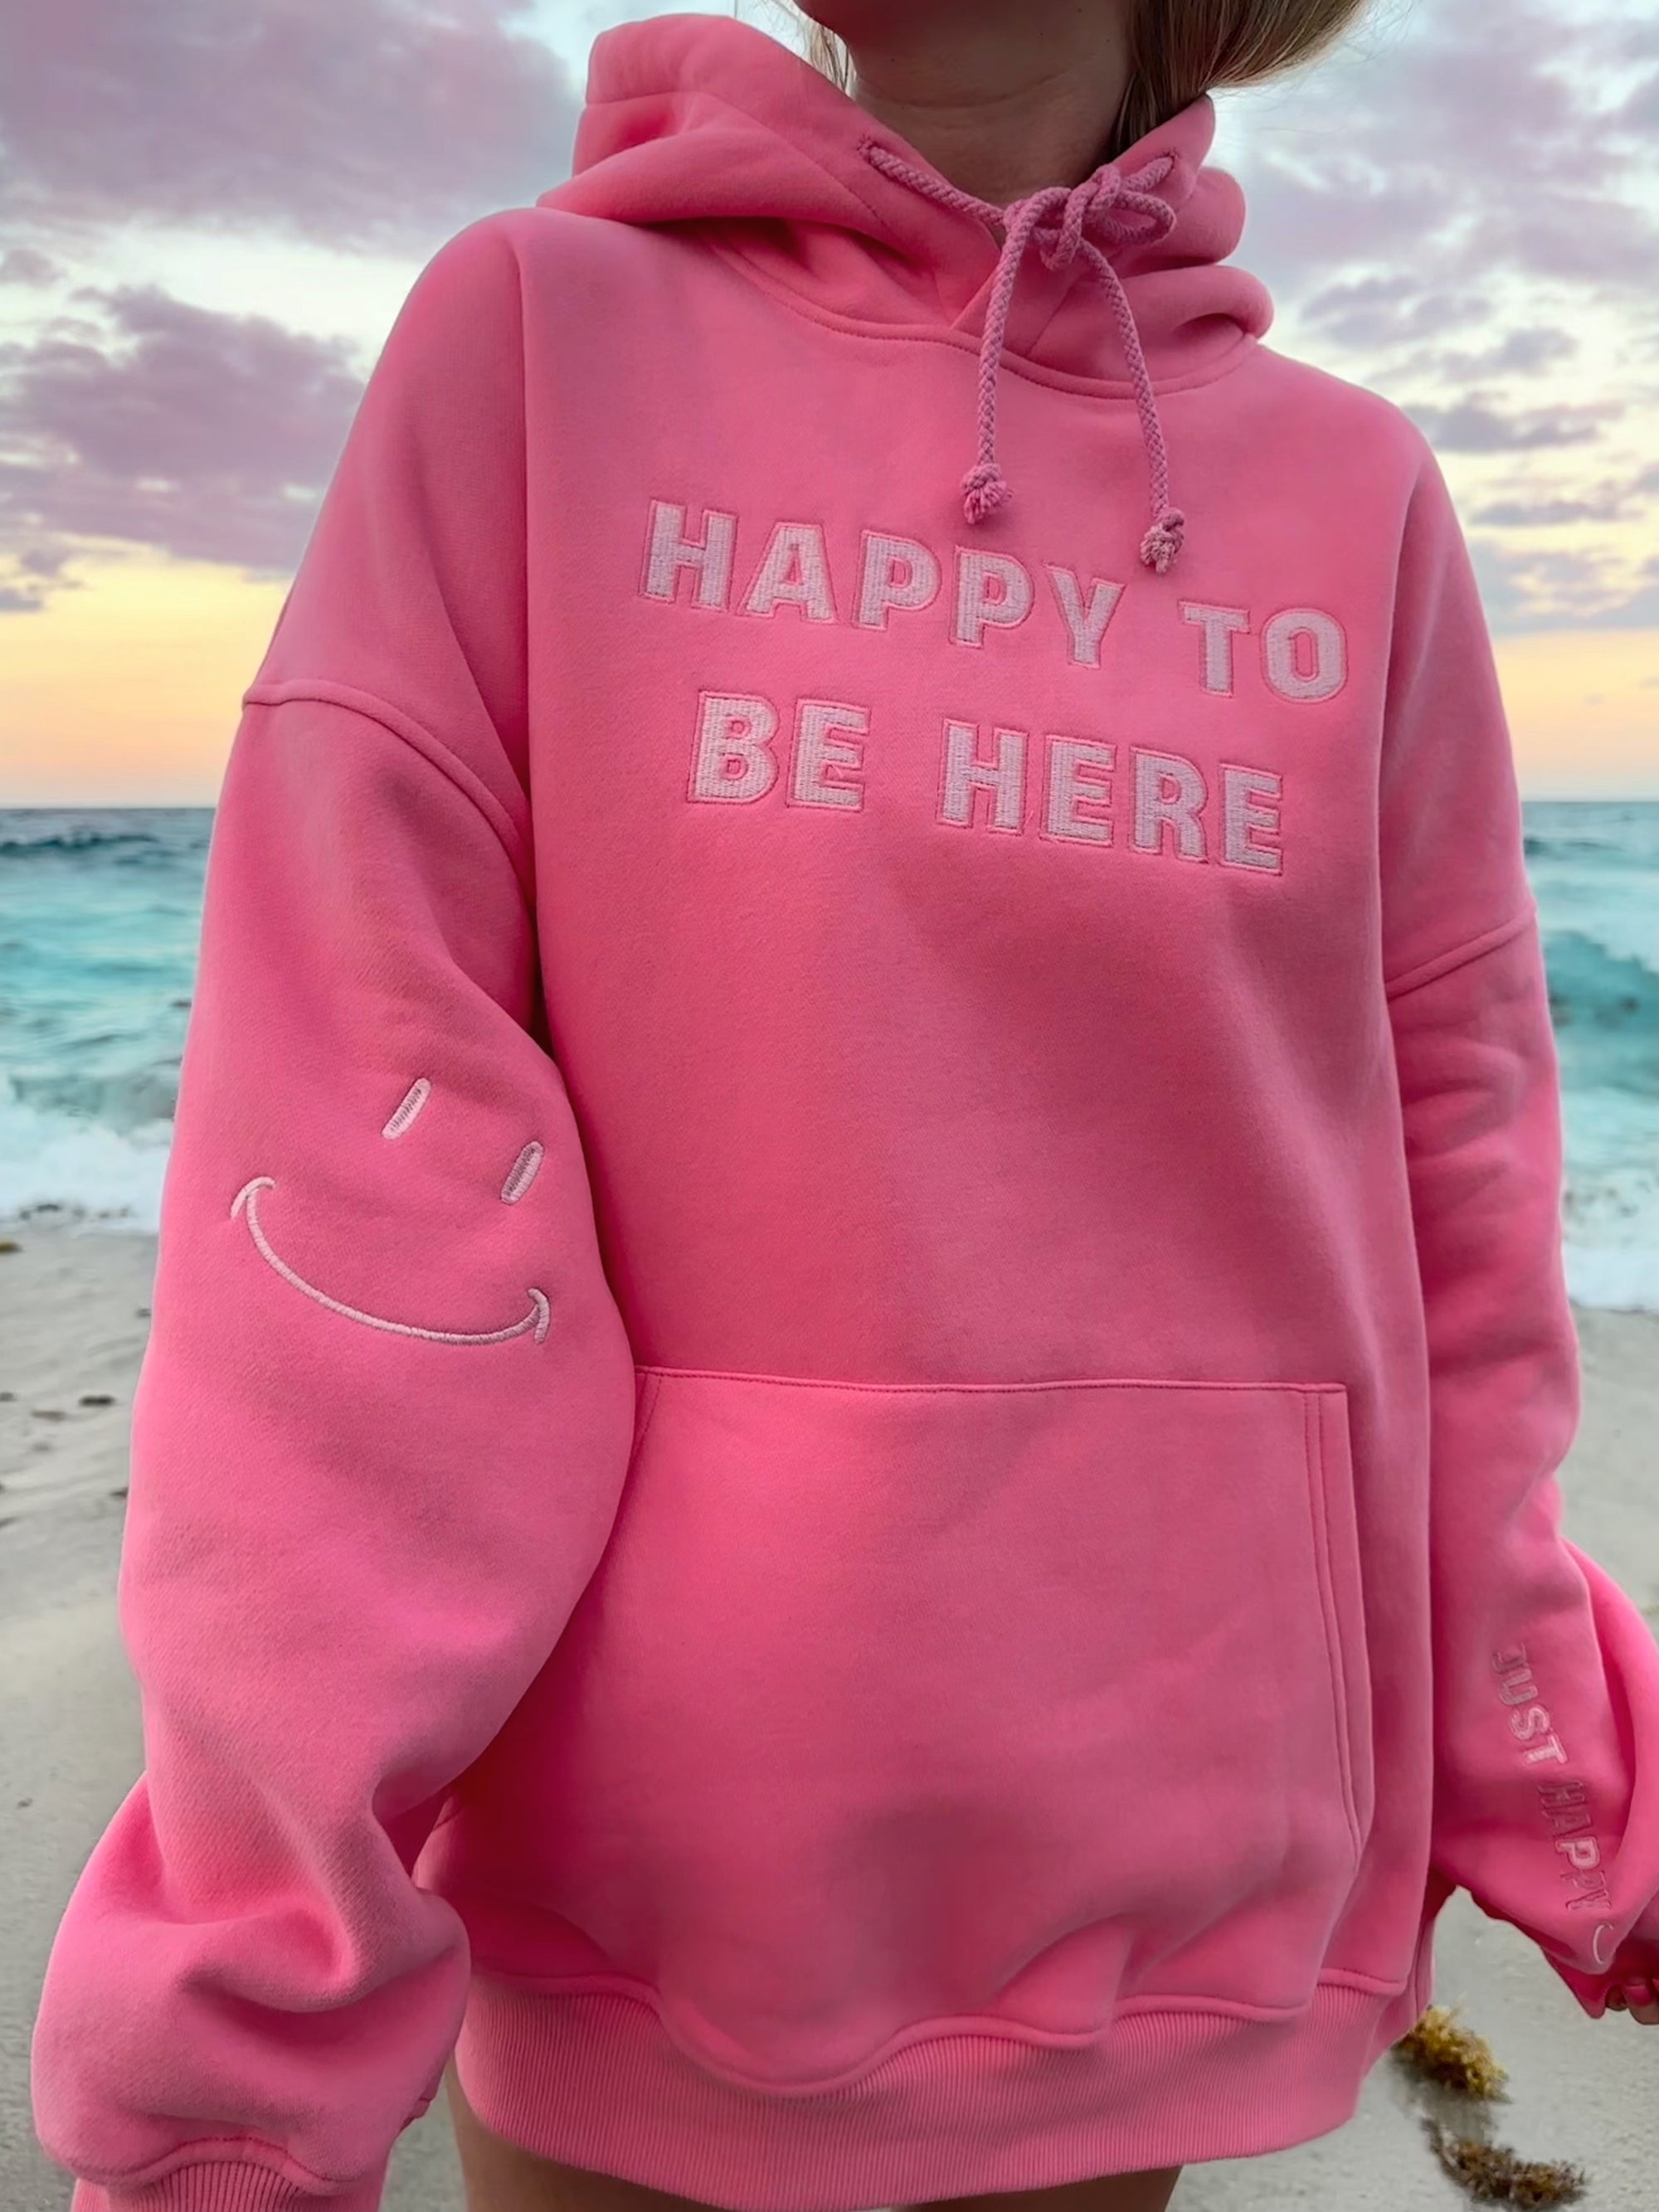 I AM JUST HAPPY TO BE HERE EMBROIDER HOODIE